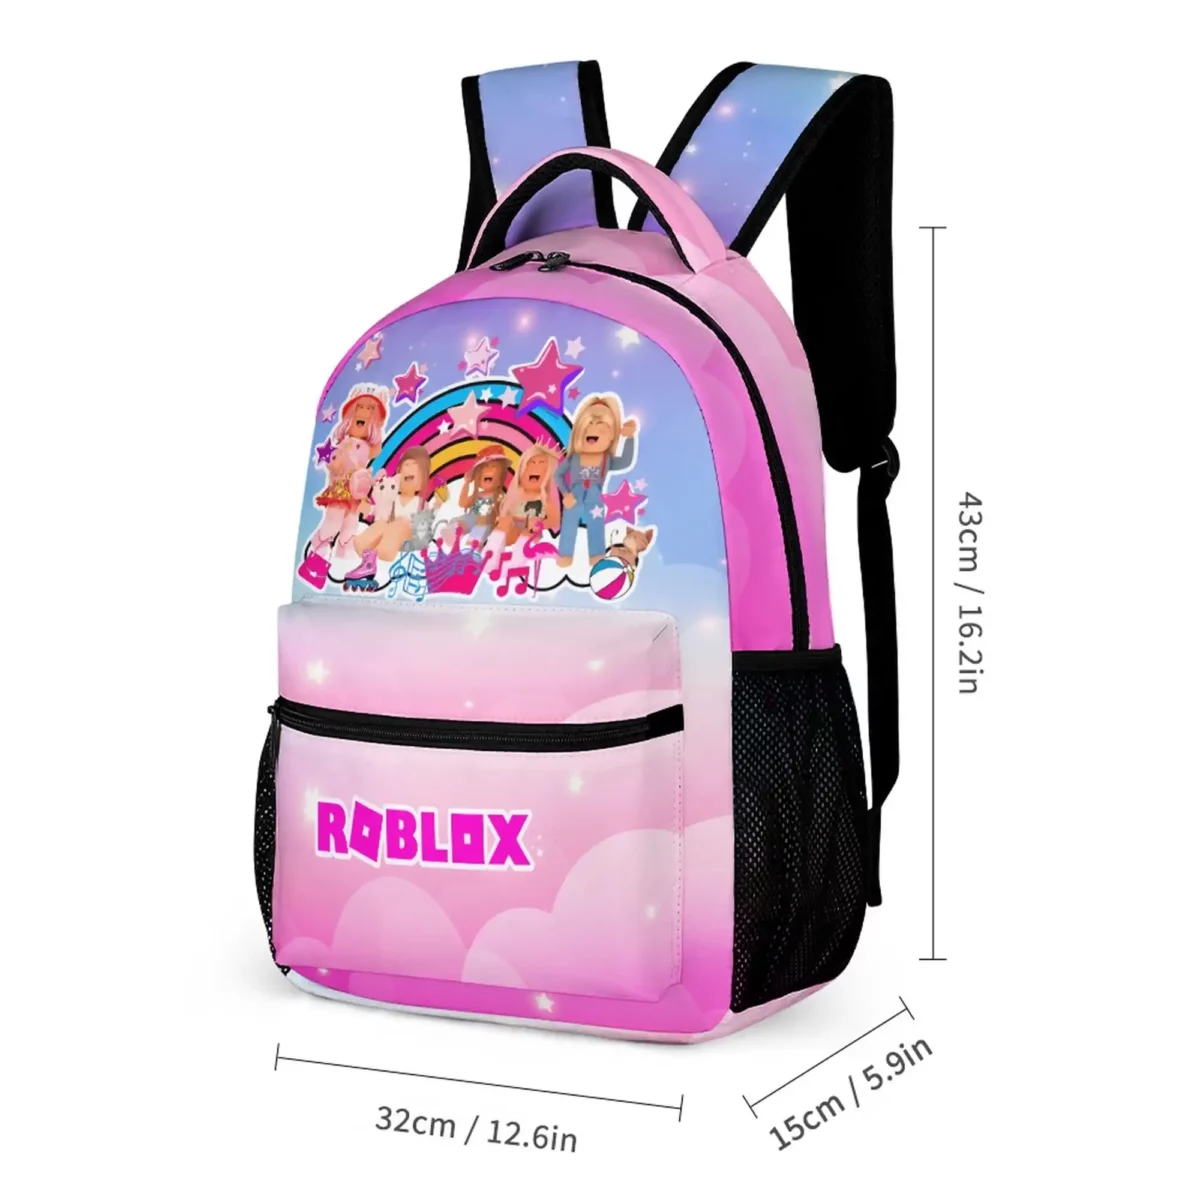 Customizable Roblox Girl backpack, lunch bag and pencil case package | Back to School combo Cool Kiddo 26